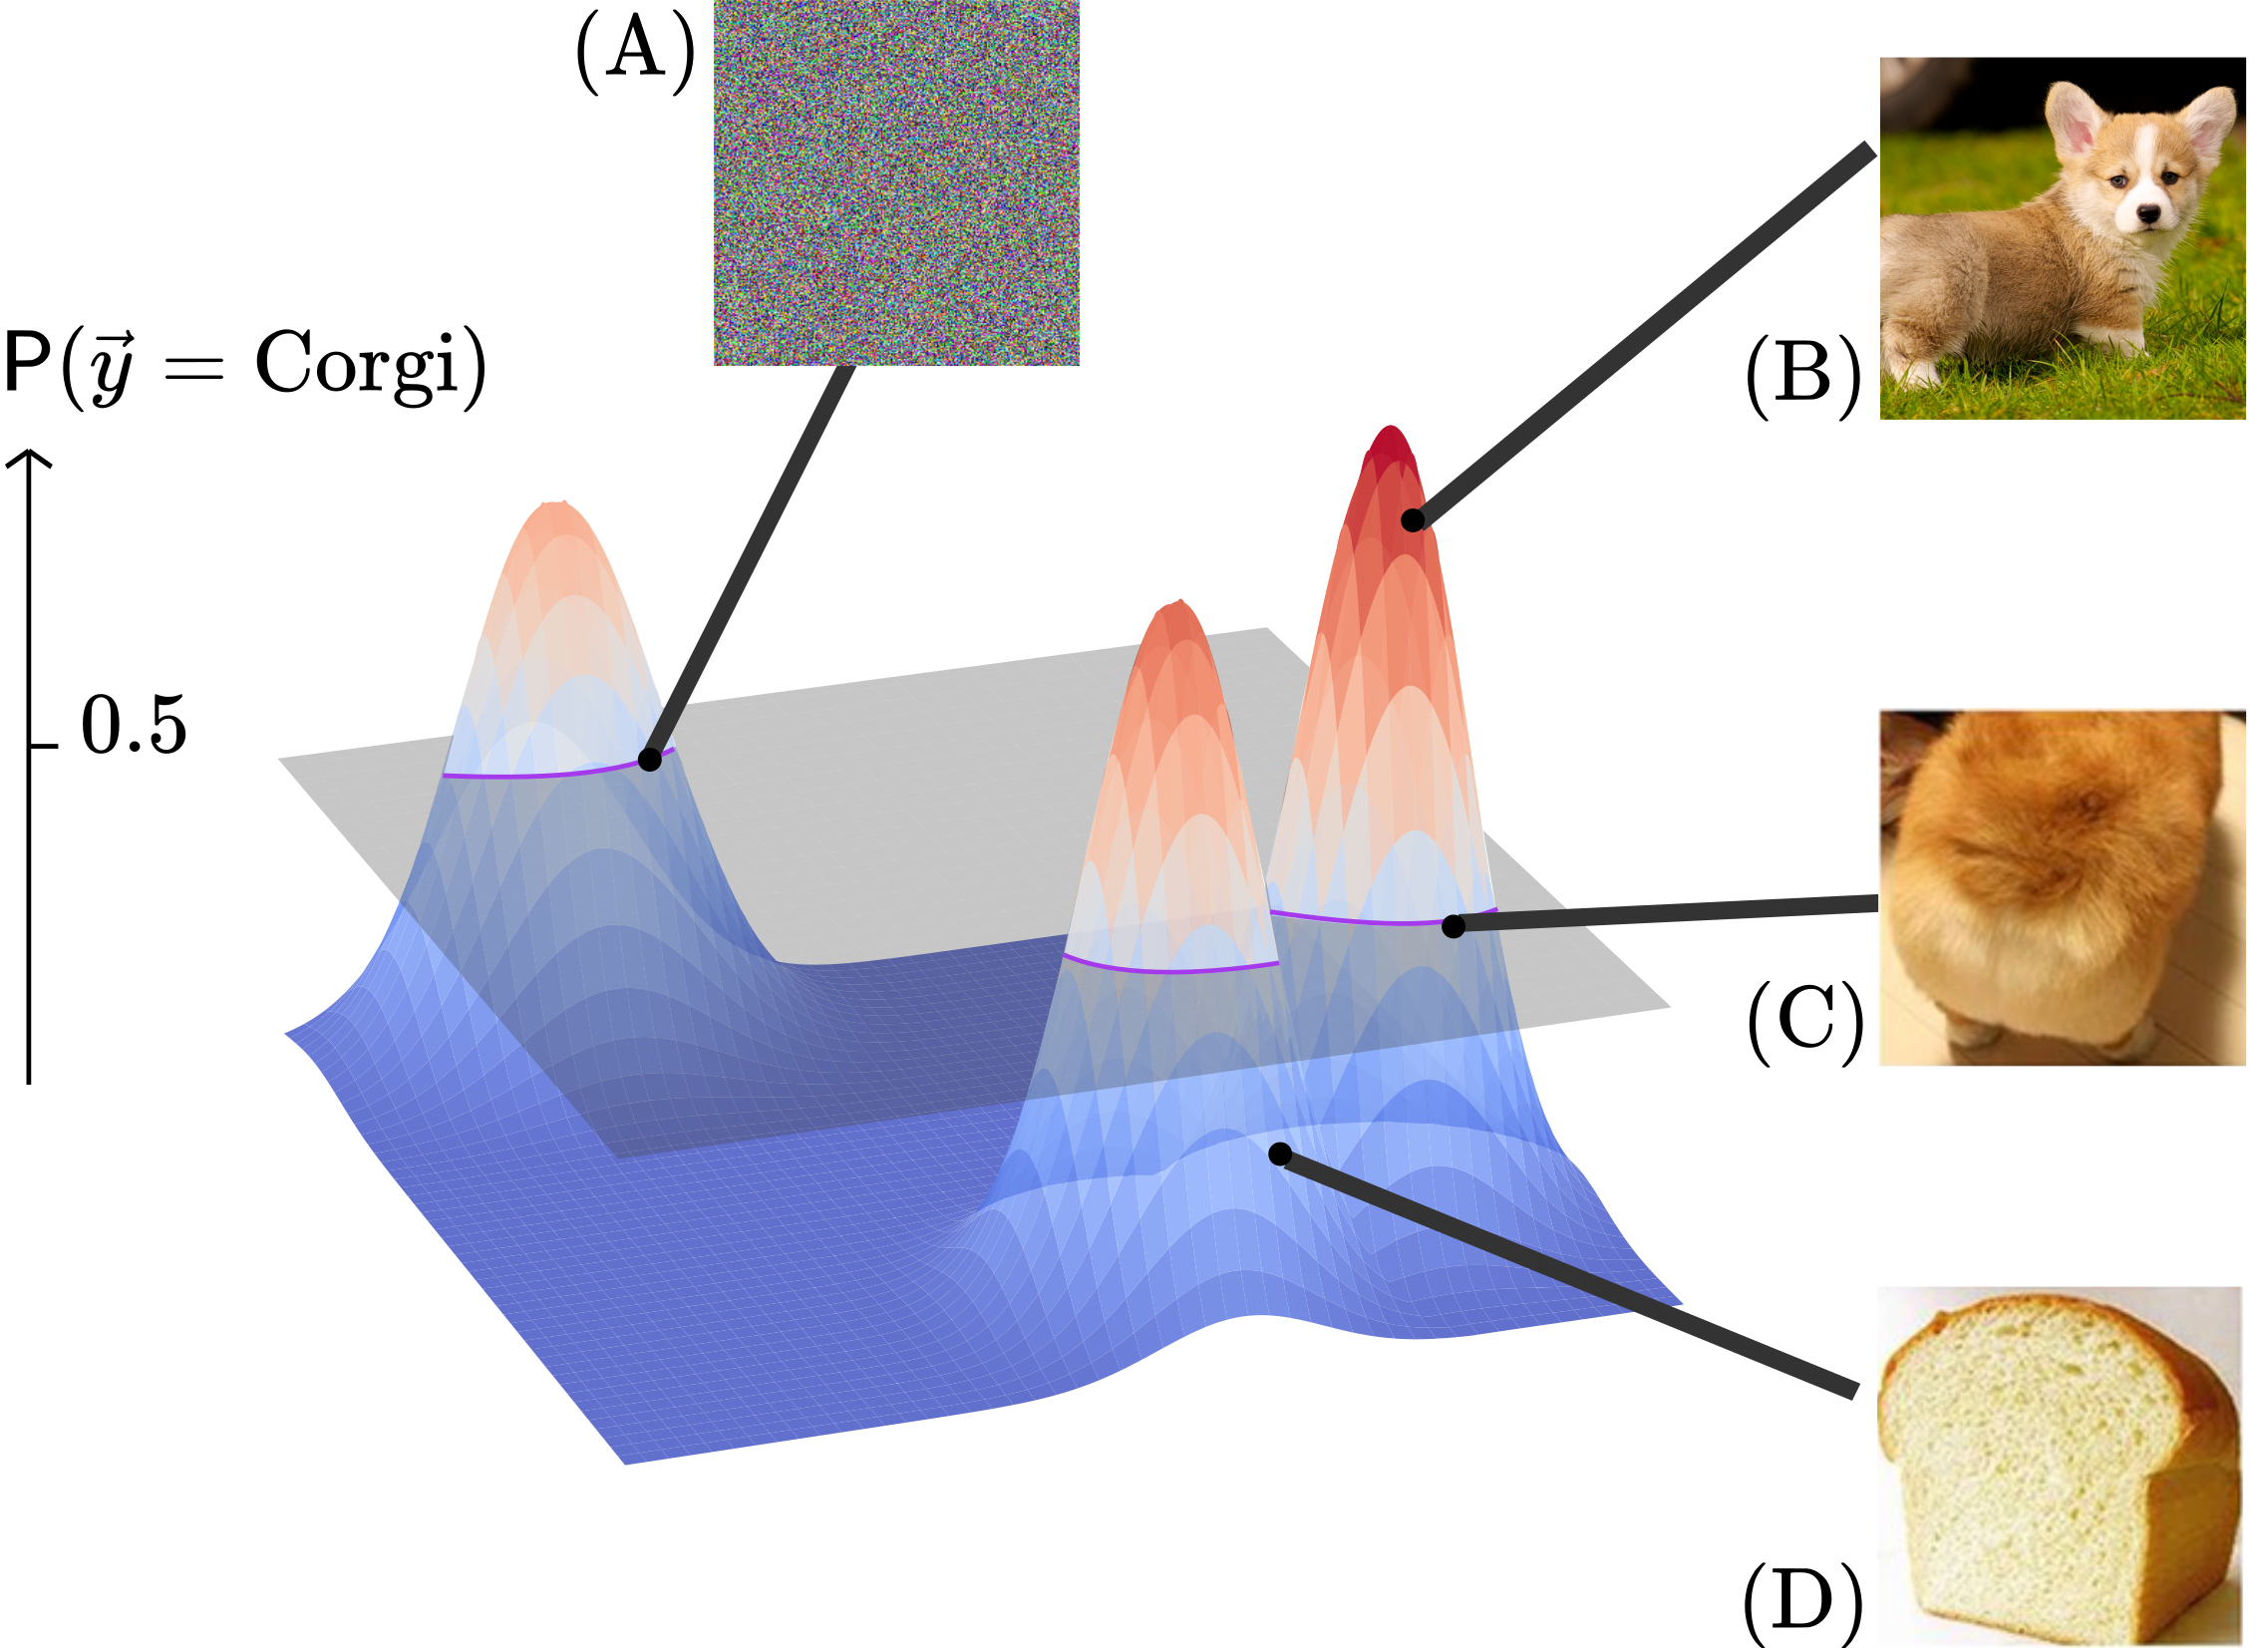 A project overview image. It shows a decision surface, with highlighted points corresponding to an adversarial example, a picture of a corgi, a picture of a corgi butt, and a picture of a loaf of bread. The level sets for 50 percent confidence examples (e.g., the corgi butt and the adversarial examples) are highlighted.